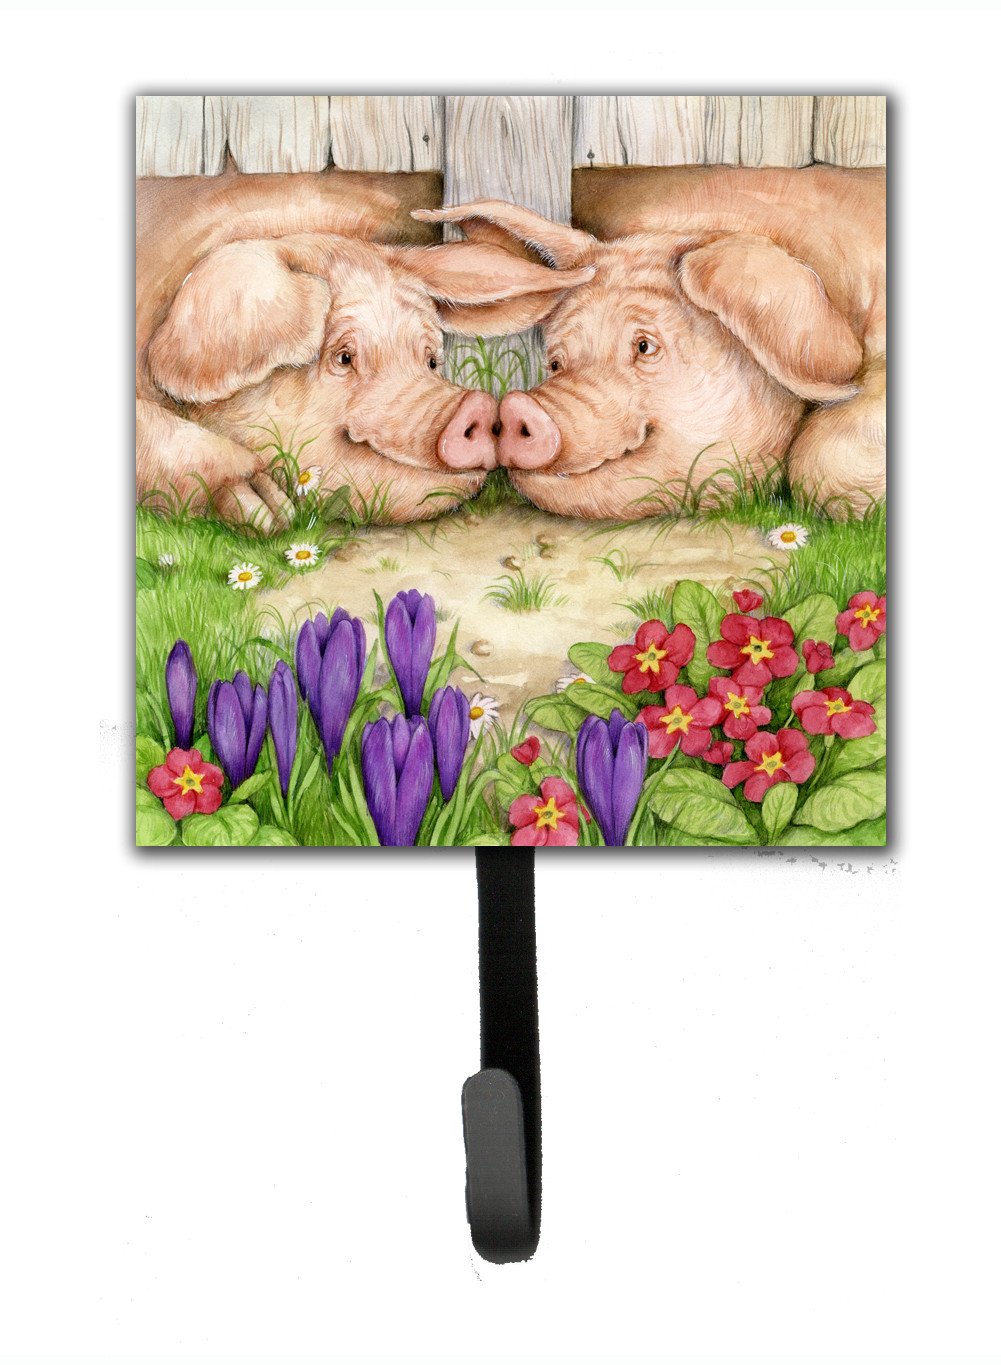 Pigs Nose To Nose by Debbie Cook Leash or Key Holder CDCO0350SH4 by Caroline's Treasures